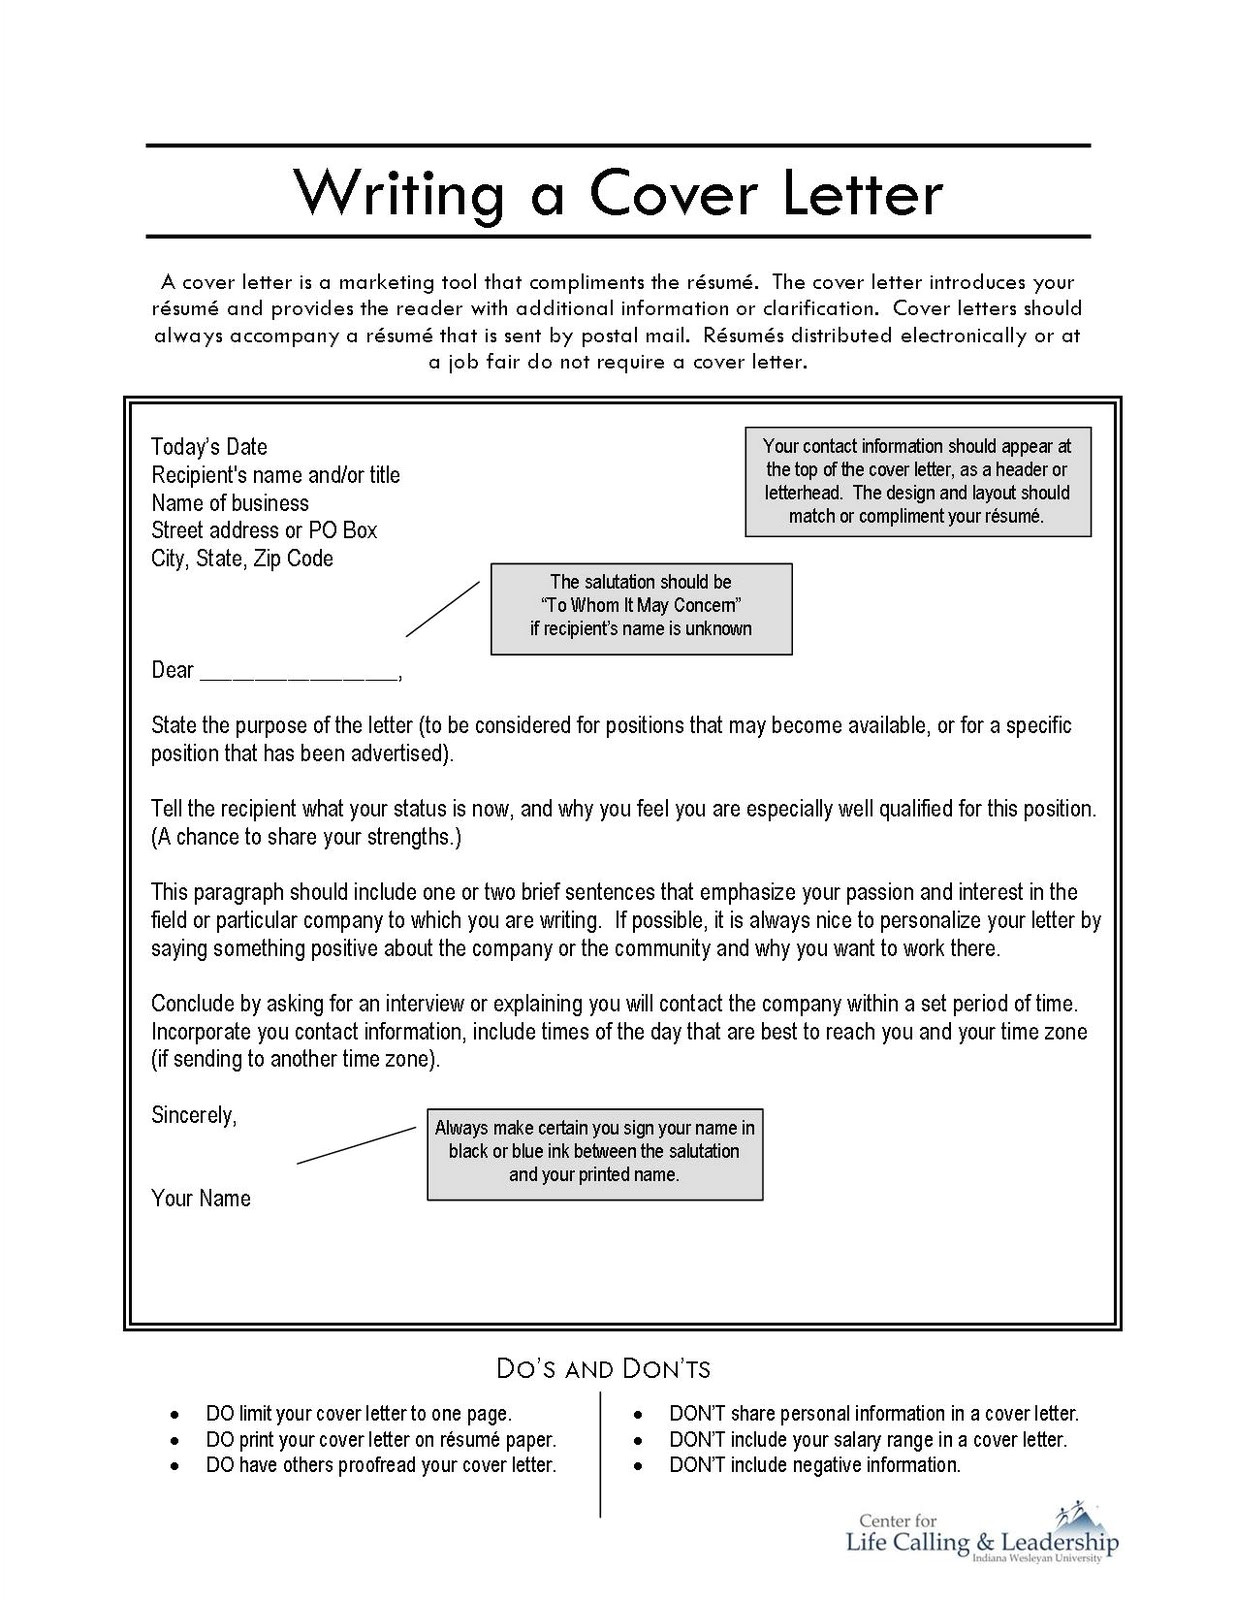 what should be included in a resume cover letter beautiful what does a cover letter for a resume look like images cover